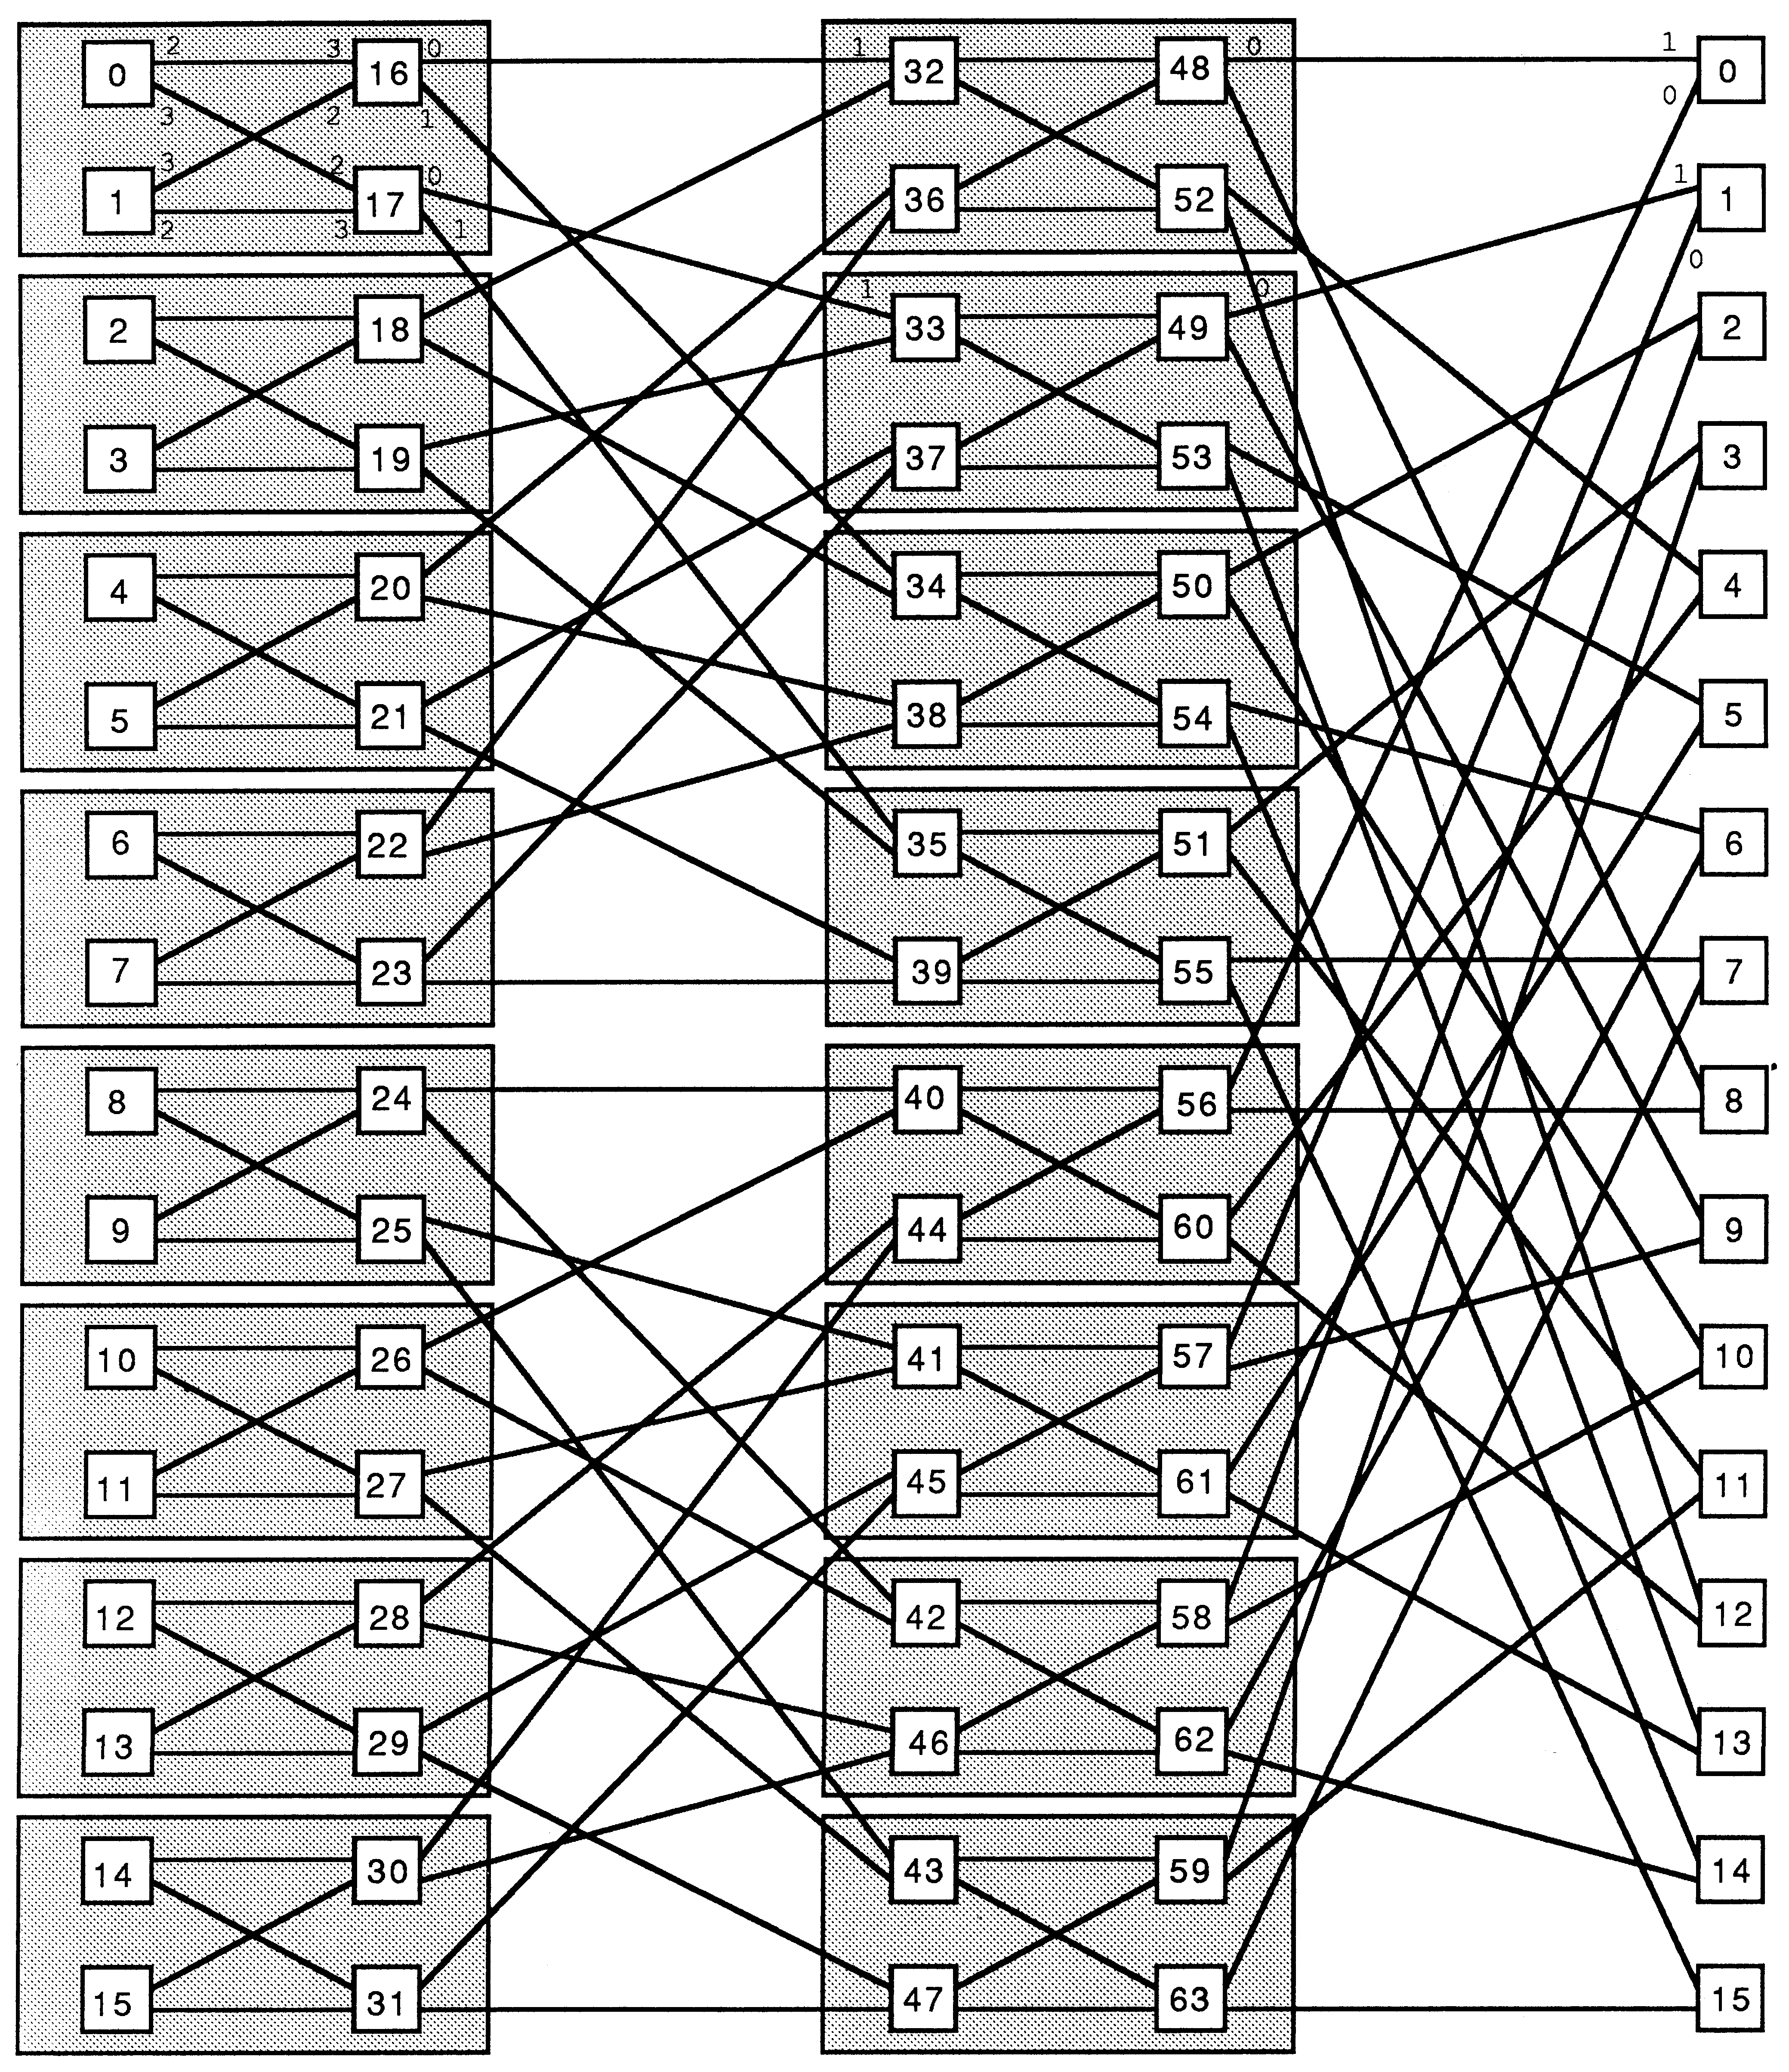 64 Node Folded Binary
Structure (mapped)